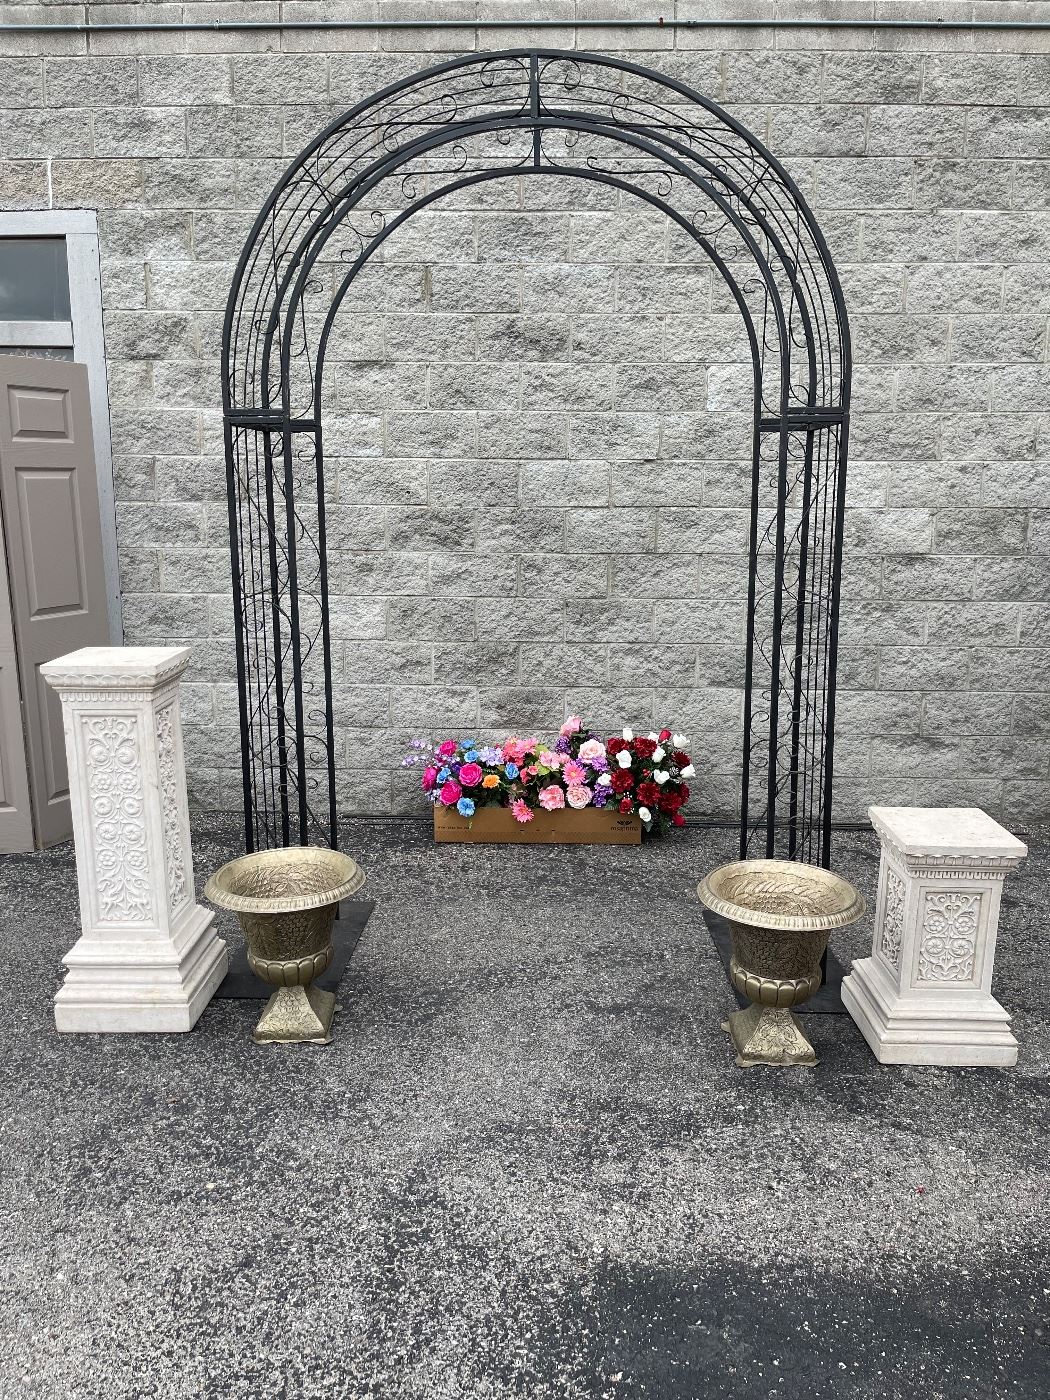 Event planners dream sale.   One of three event arches, one of 12 tall white pedestals, one of 6 small pedestals and a pair of light weight metal urns for events. 